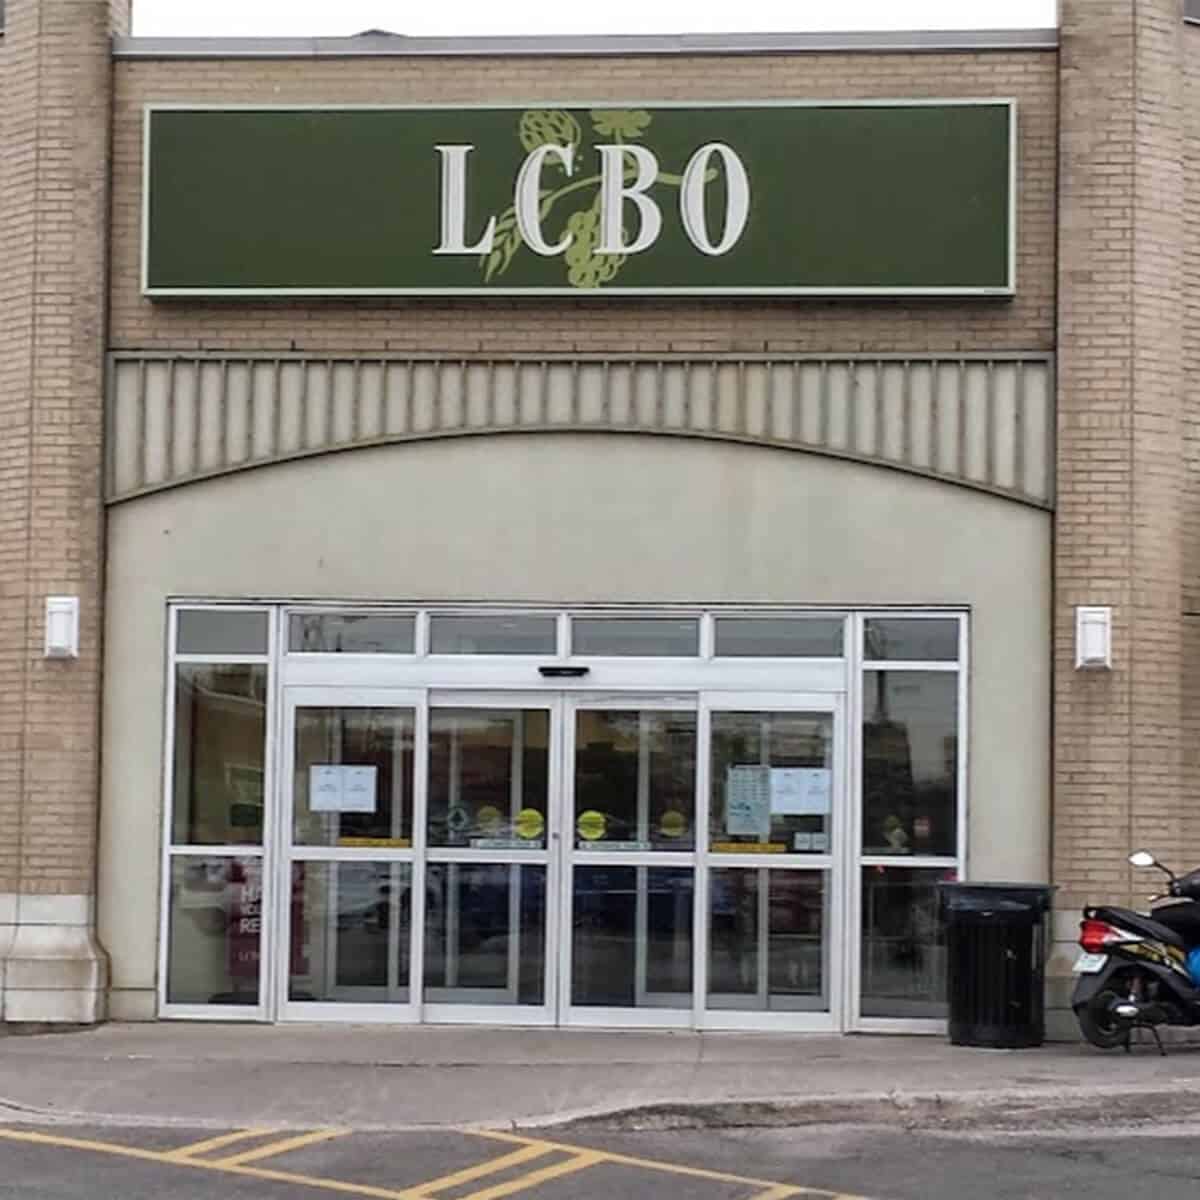 LCBO Etobicoke : Locations, Hours & More